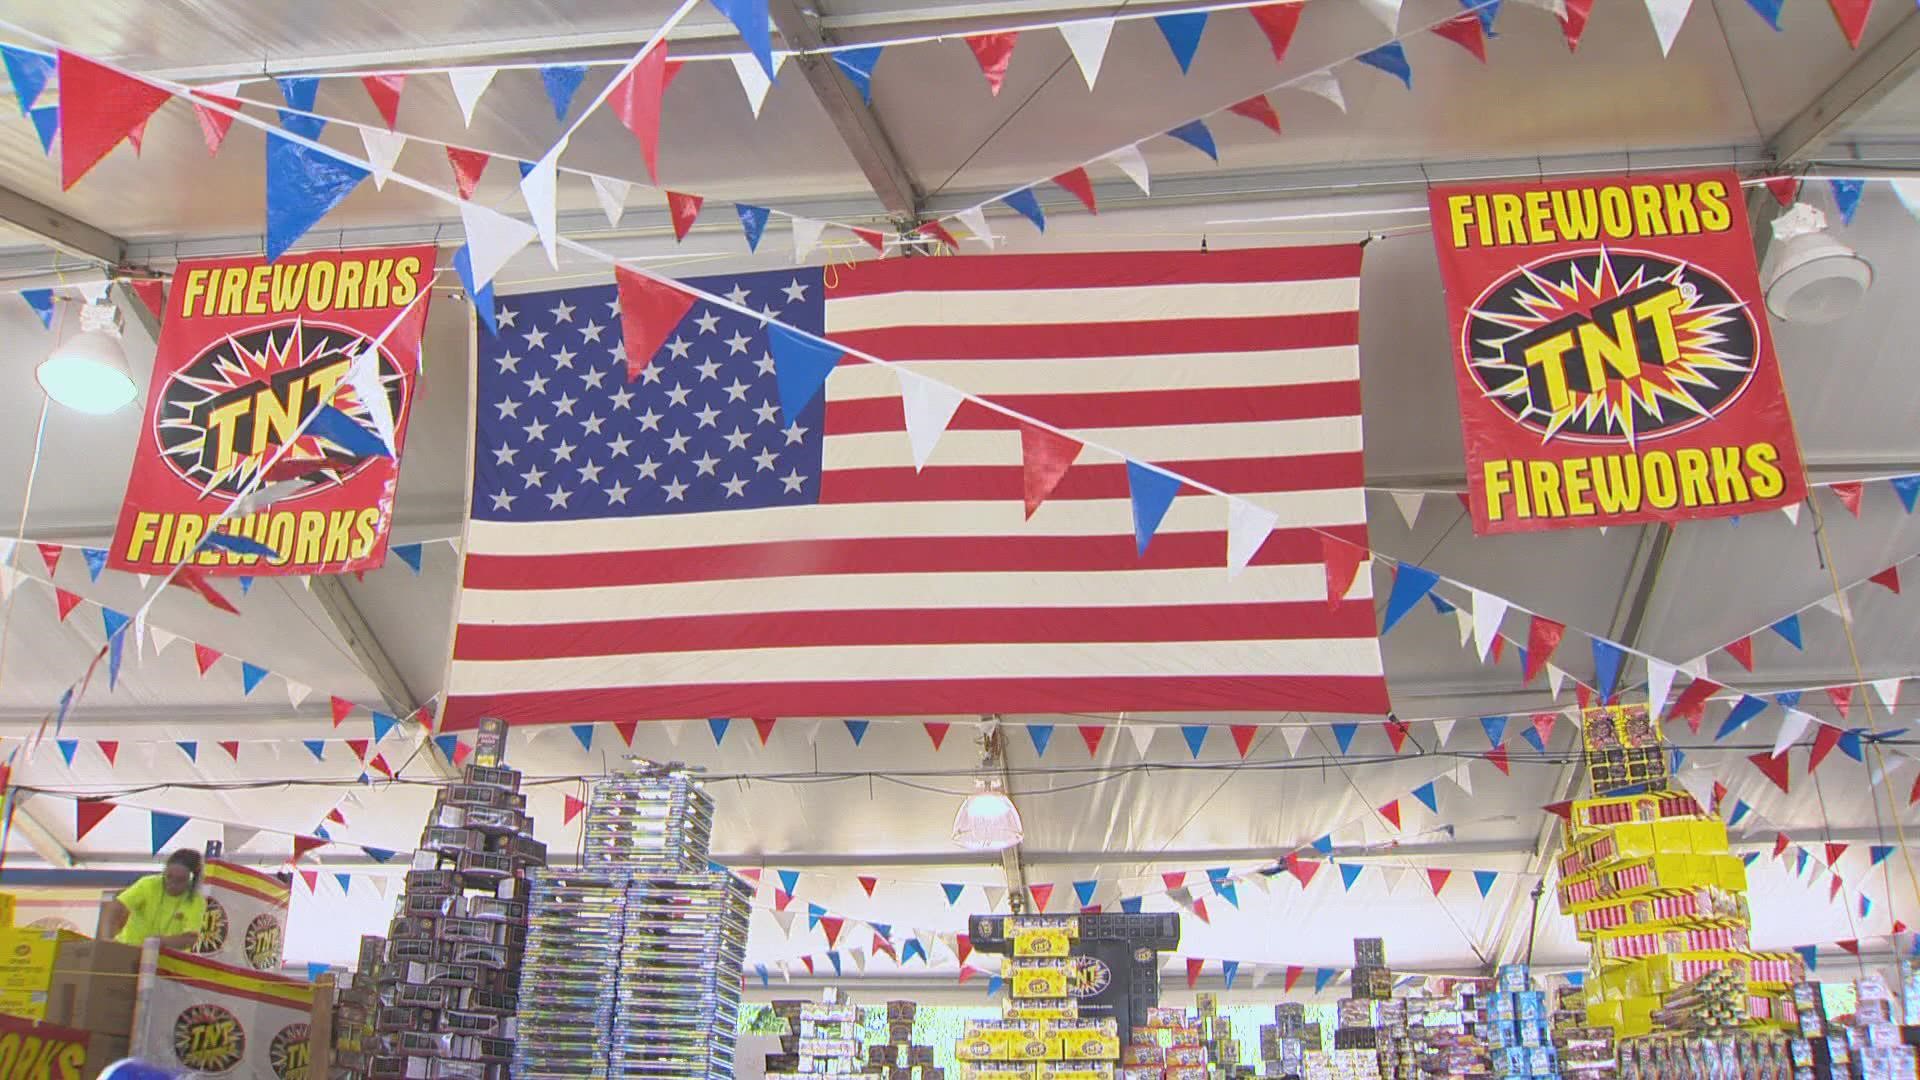 Ban went into effect today, ahead of fourth of July celebrations.